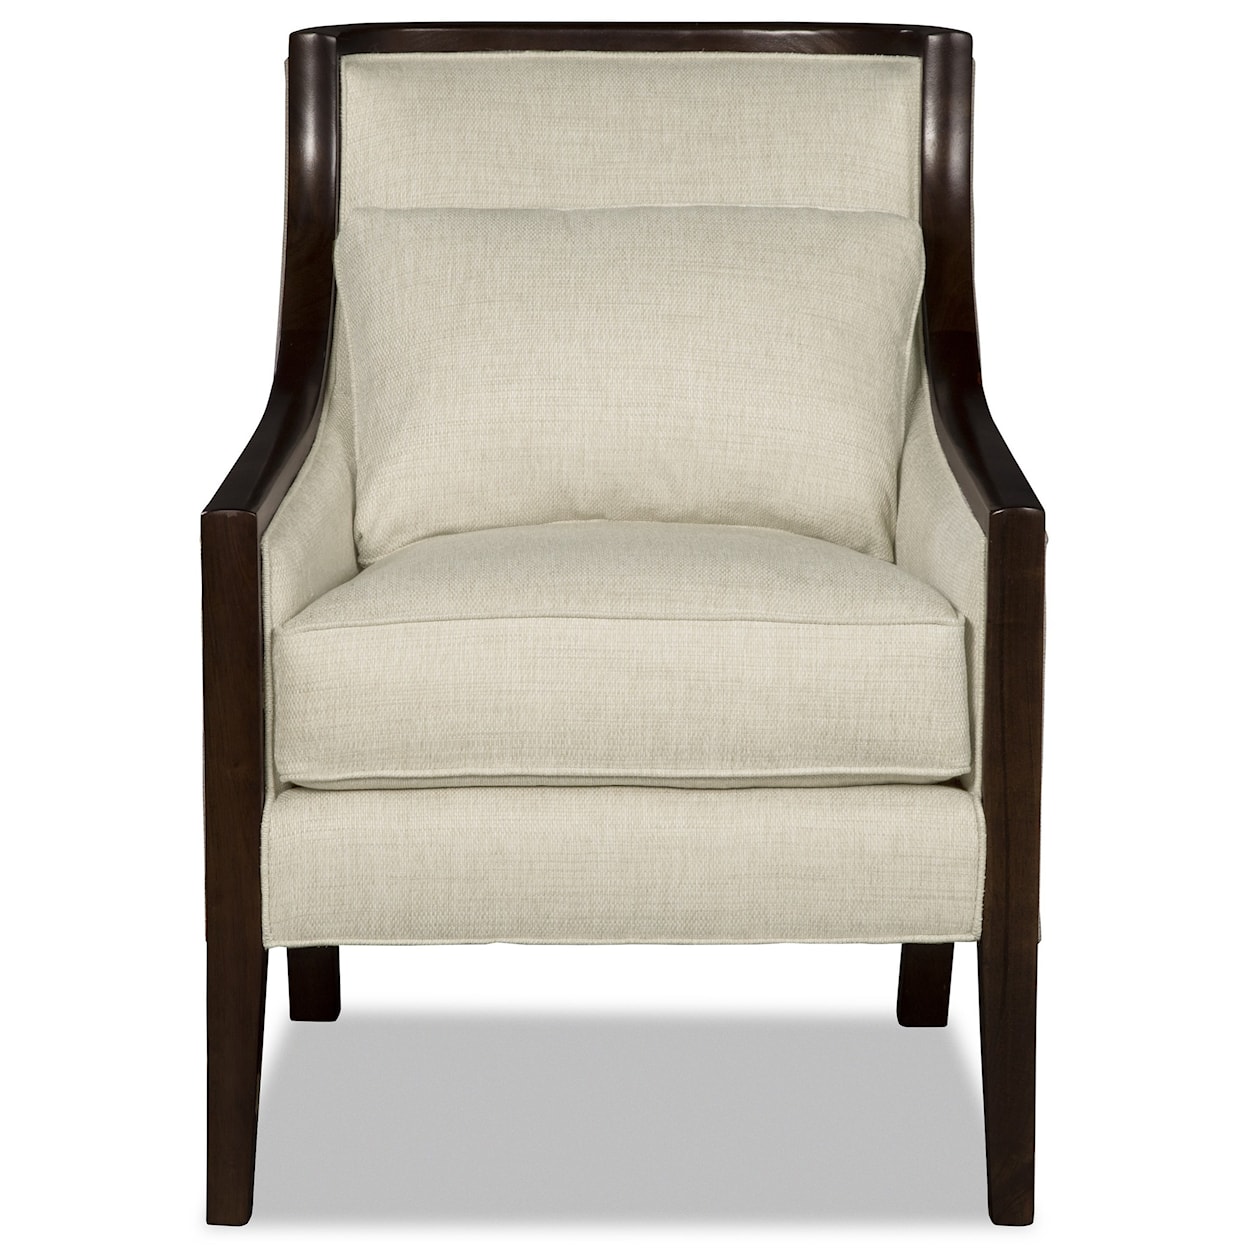 Hickory Craft 001810 Wood Accent Chair